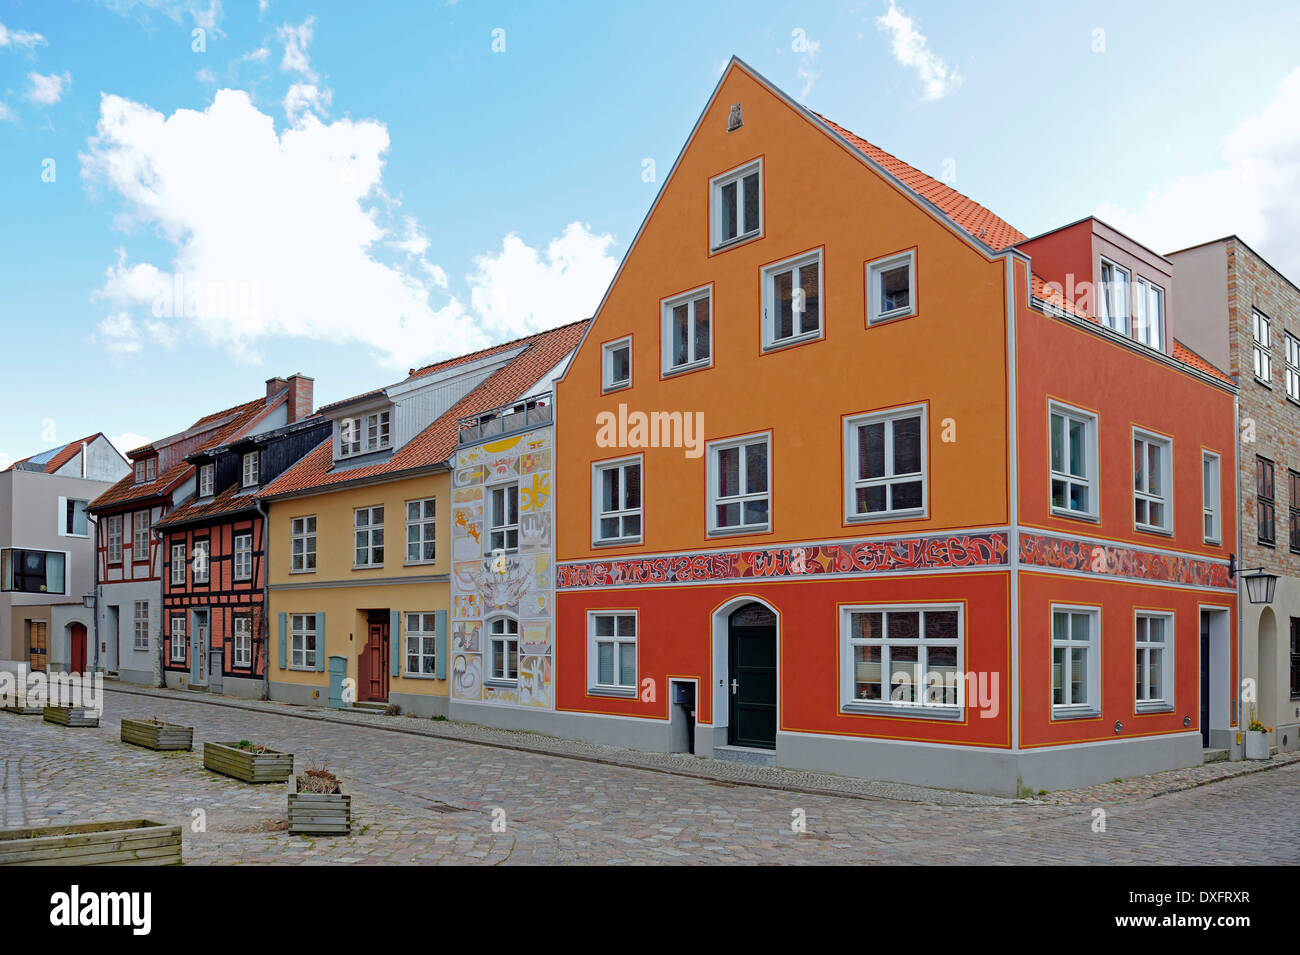 Renovated half-timbered houses, historic town centre, Hanseatic City of Stralsund, Mecklenburg-Western Pomerania, Germany Stock Photo